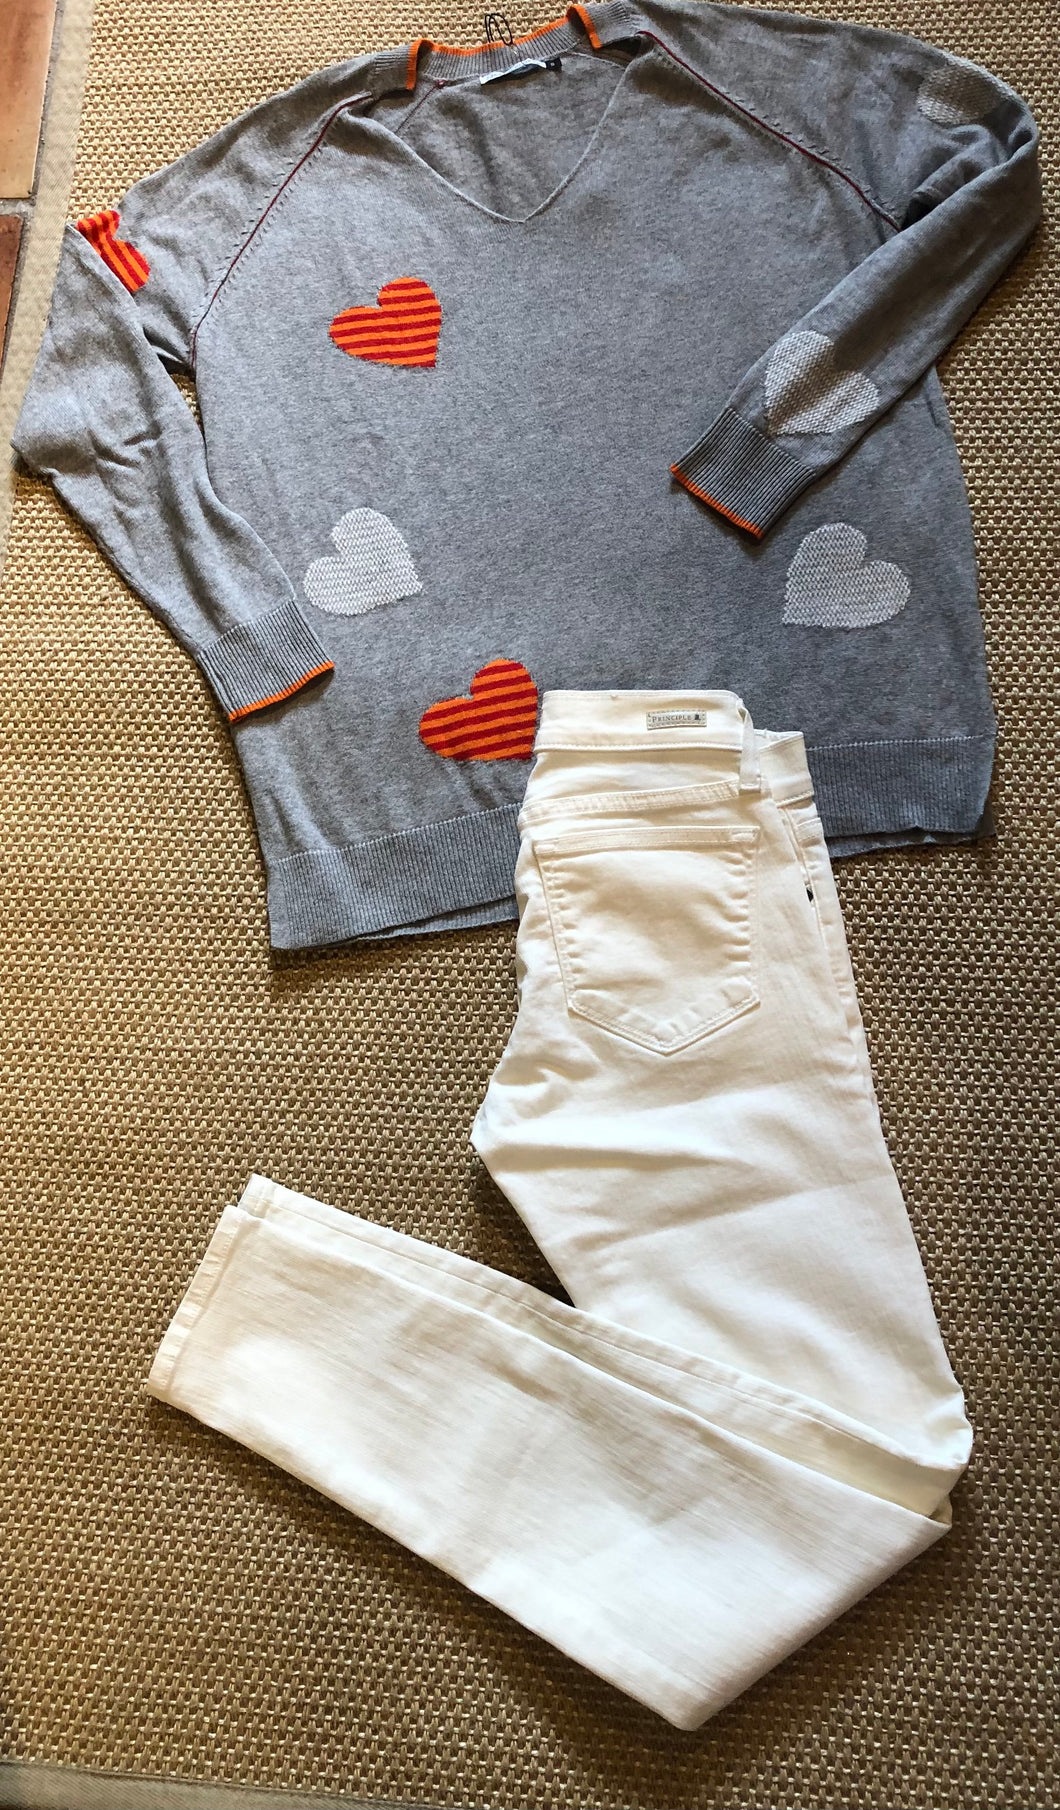 Zaket & Plover Love is Everywhere Sweater Grey with orange and Pink hearts